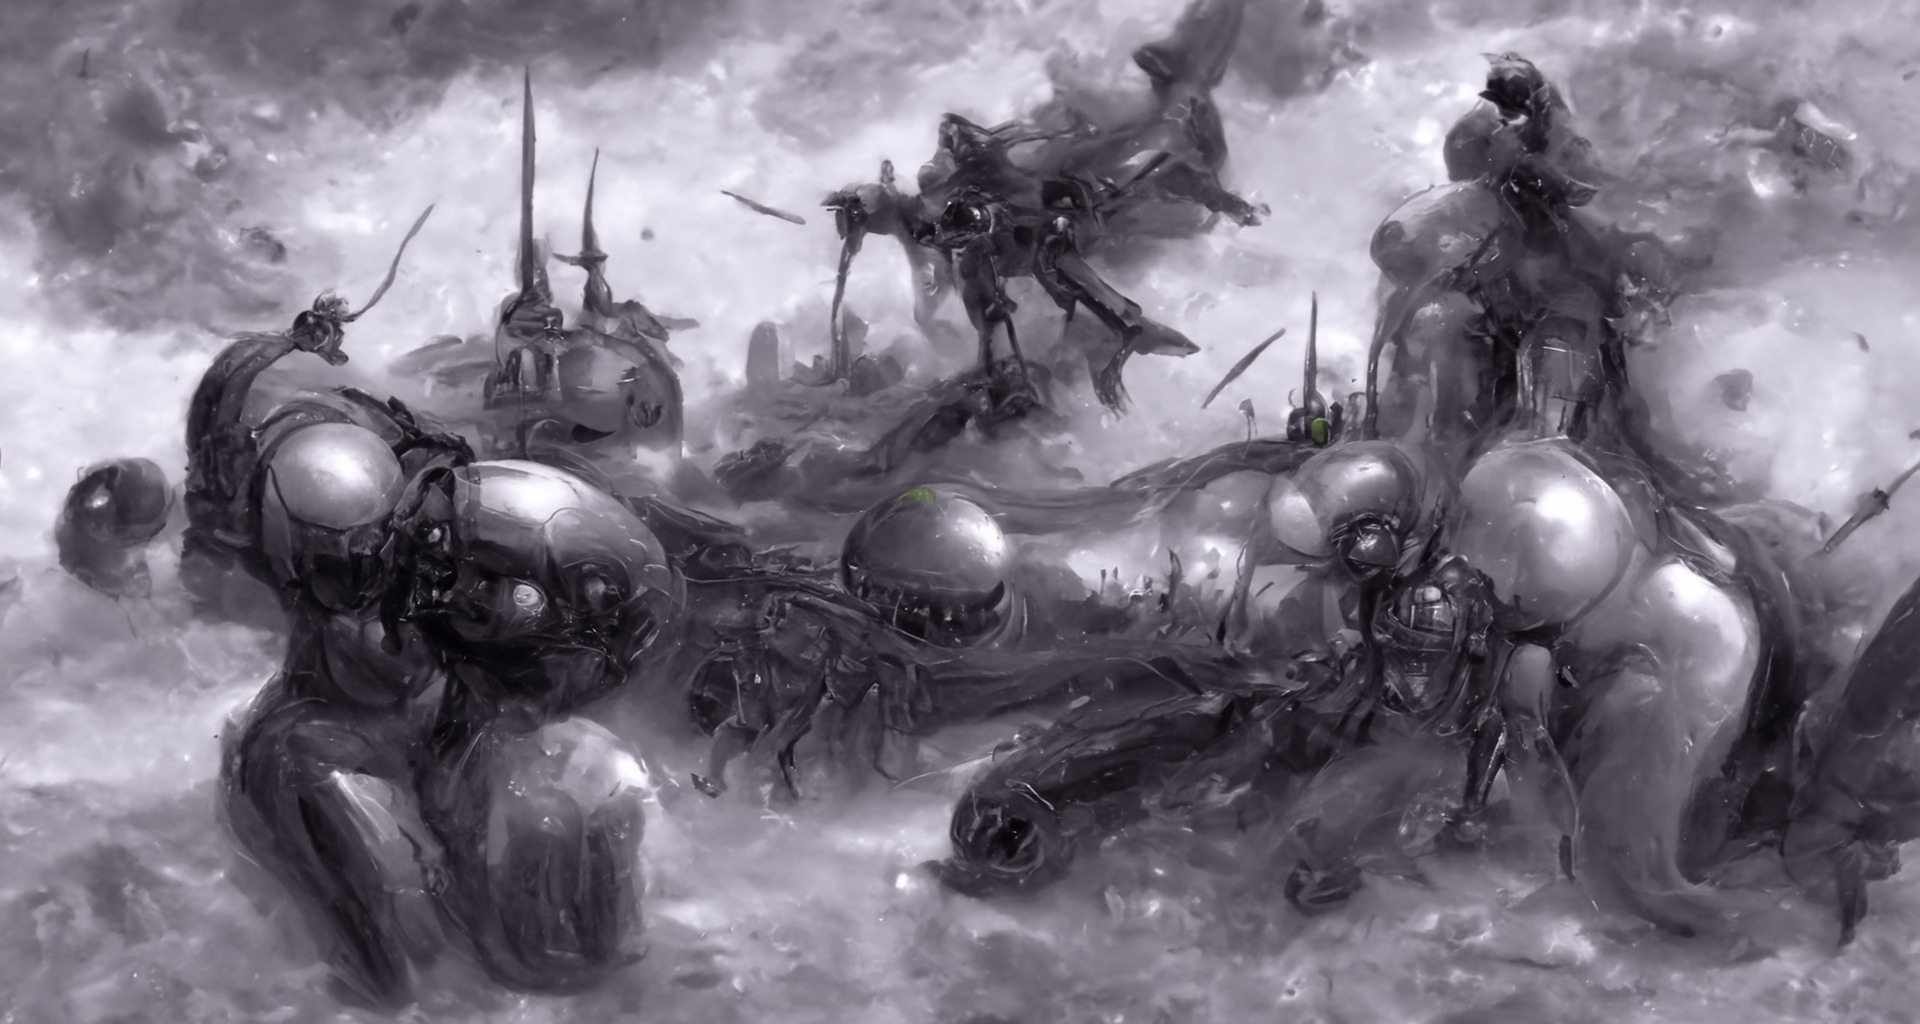 0: ["Endless battle, trending on deviantart", "battle throughout time and space, trending on artstation", "Endless battle, trending on deviantart - a battle throughout time and space, trending on artstation", "bizarre limbless cybernetic monster orgy, trending on furaffinity", "an invasion of zombies and robotic caterpillars fighting space marines and conquistadors in flying spanish galleons, renaissance style", "bizarre limbless cybernetic monster orgy, trending on furaffinity - an invasion of zombies and robotic caterpillars fighting space marines and conquistadors in flying spanish galleons, renaissance style", "Endless battle, trending on deviantart - a battle throughout time and space, trending on artstation. Bizarre limbless cybernetic monster orgy, trending on furaffinity - an invasion of zombies and robotic caterpillars fighting space marines and conquistadors in flying spanish galleons, renaissance style", "biomemetic architecture pleasure dome city, retrofuturism", "martian soil, in oil painting", "biomemetic architecture pleasure dome city on martian soil, retrofuturism mixed with oil", "photorealistic cataclysmic sky", "elon musk crying gently into his hot cocoa:0.1", "photorealistic cataclysmic sky with elon musk crying gently into his hot cocoa:0.1", "biomemetic architecture pleasure dome city on martian soil, retrofuturism mixed with oil with a photorealistic cataclysmic sky and elon musk crying gently into his hot cocoa:0.1", "Endless battle time and space artstation bizarre limbless cybernetic monster orgy furaffinity invasion zombies robotic caterpillars fighting space marines conquistadors flying spanish galleons renaissance style biomemetic architecture pleasure dome city martian soil retrofuturism with oil photorealistic cataclysmic sky elon musk crying gently hot cocoa:0.1"],